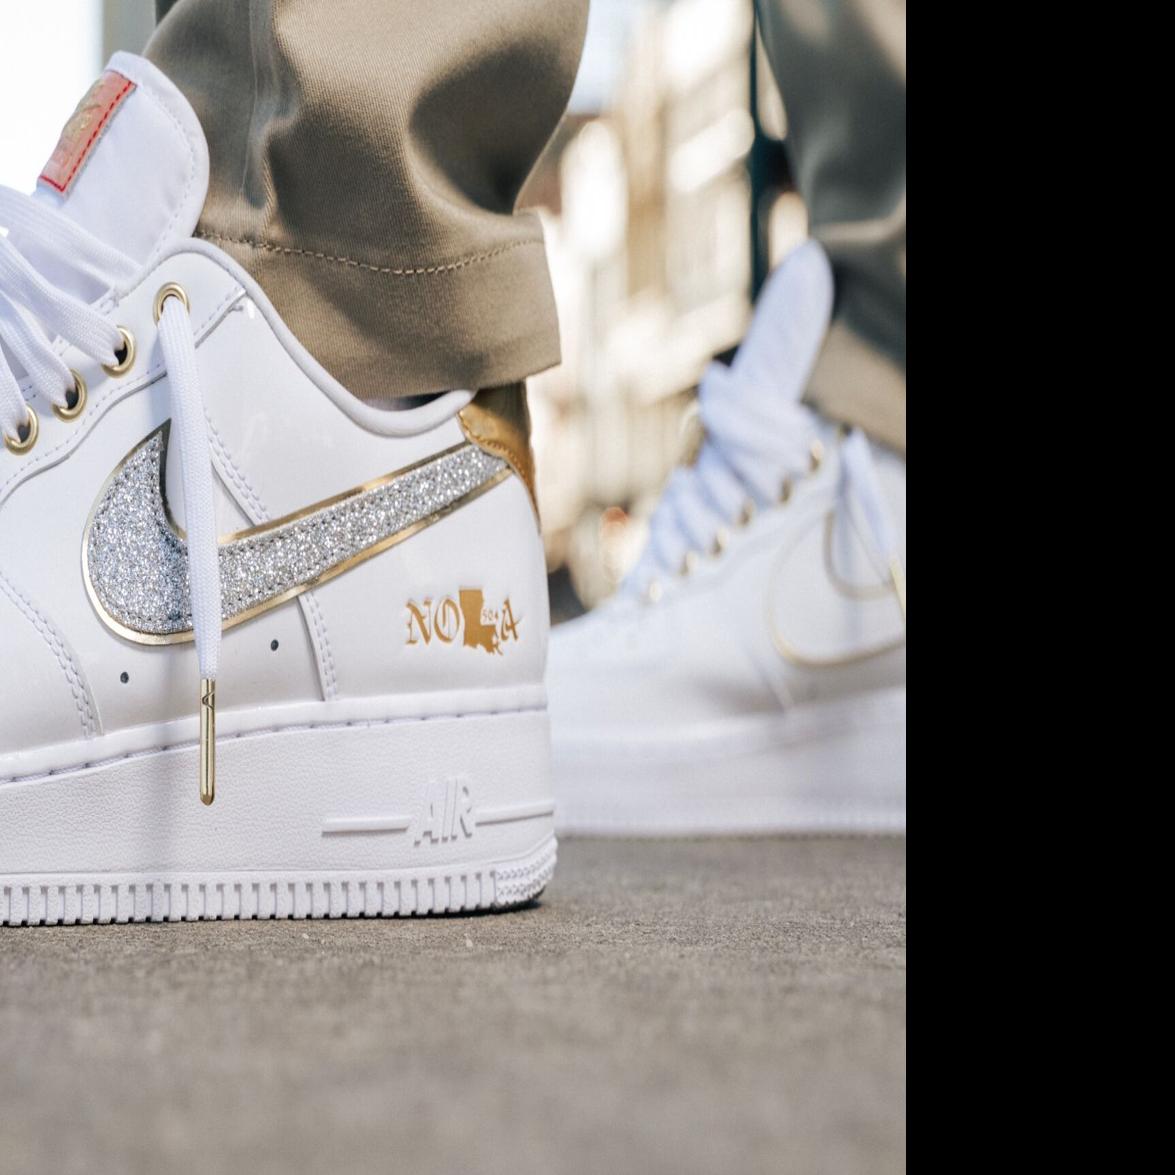 Commander NIKE Air Force 1 (GS) white/white Fashion sneakers sur SNIPES